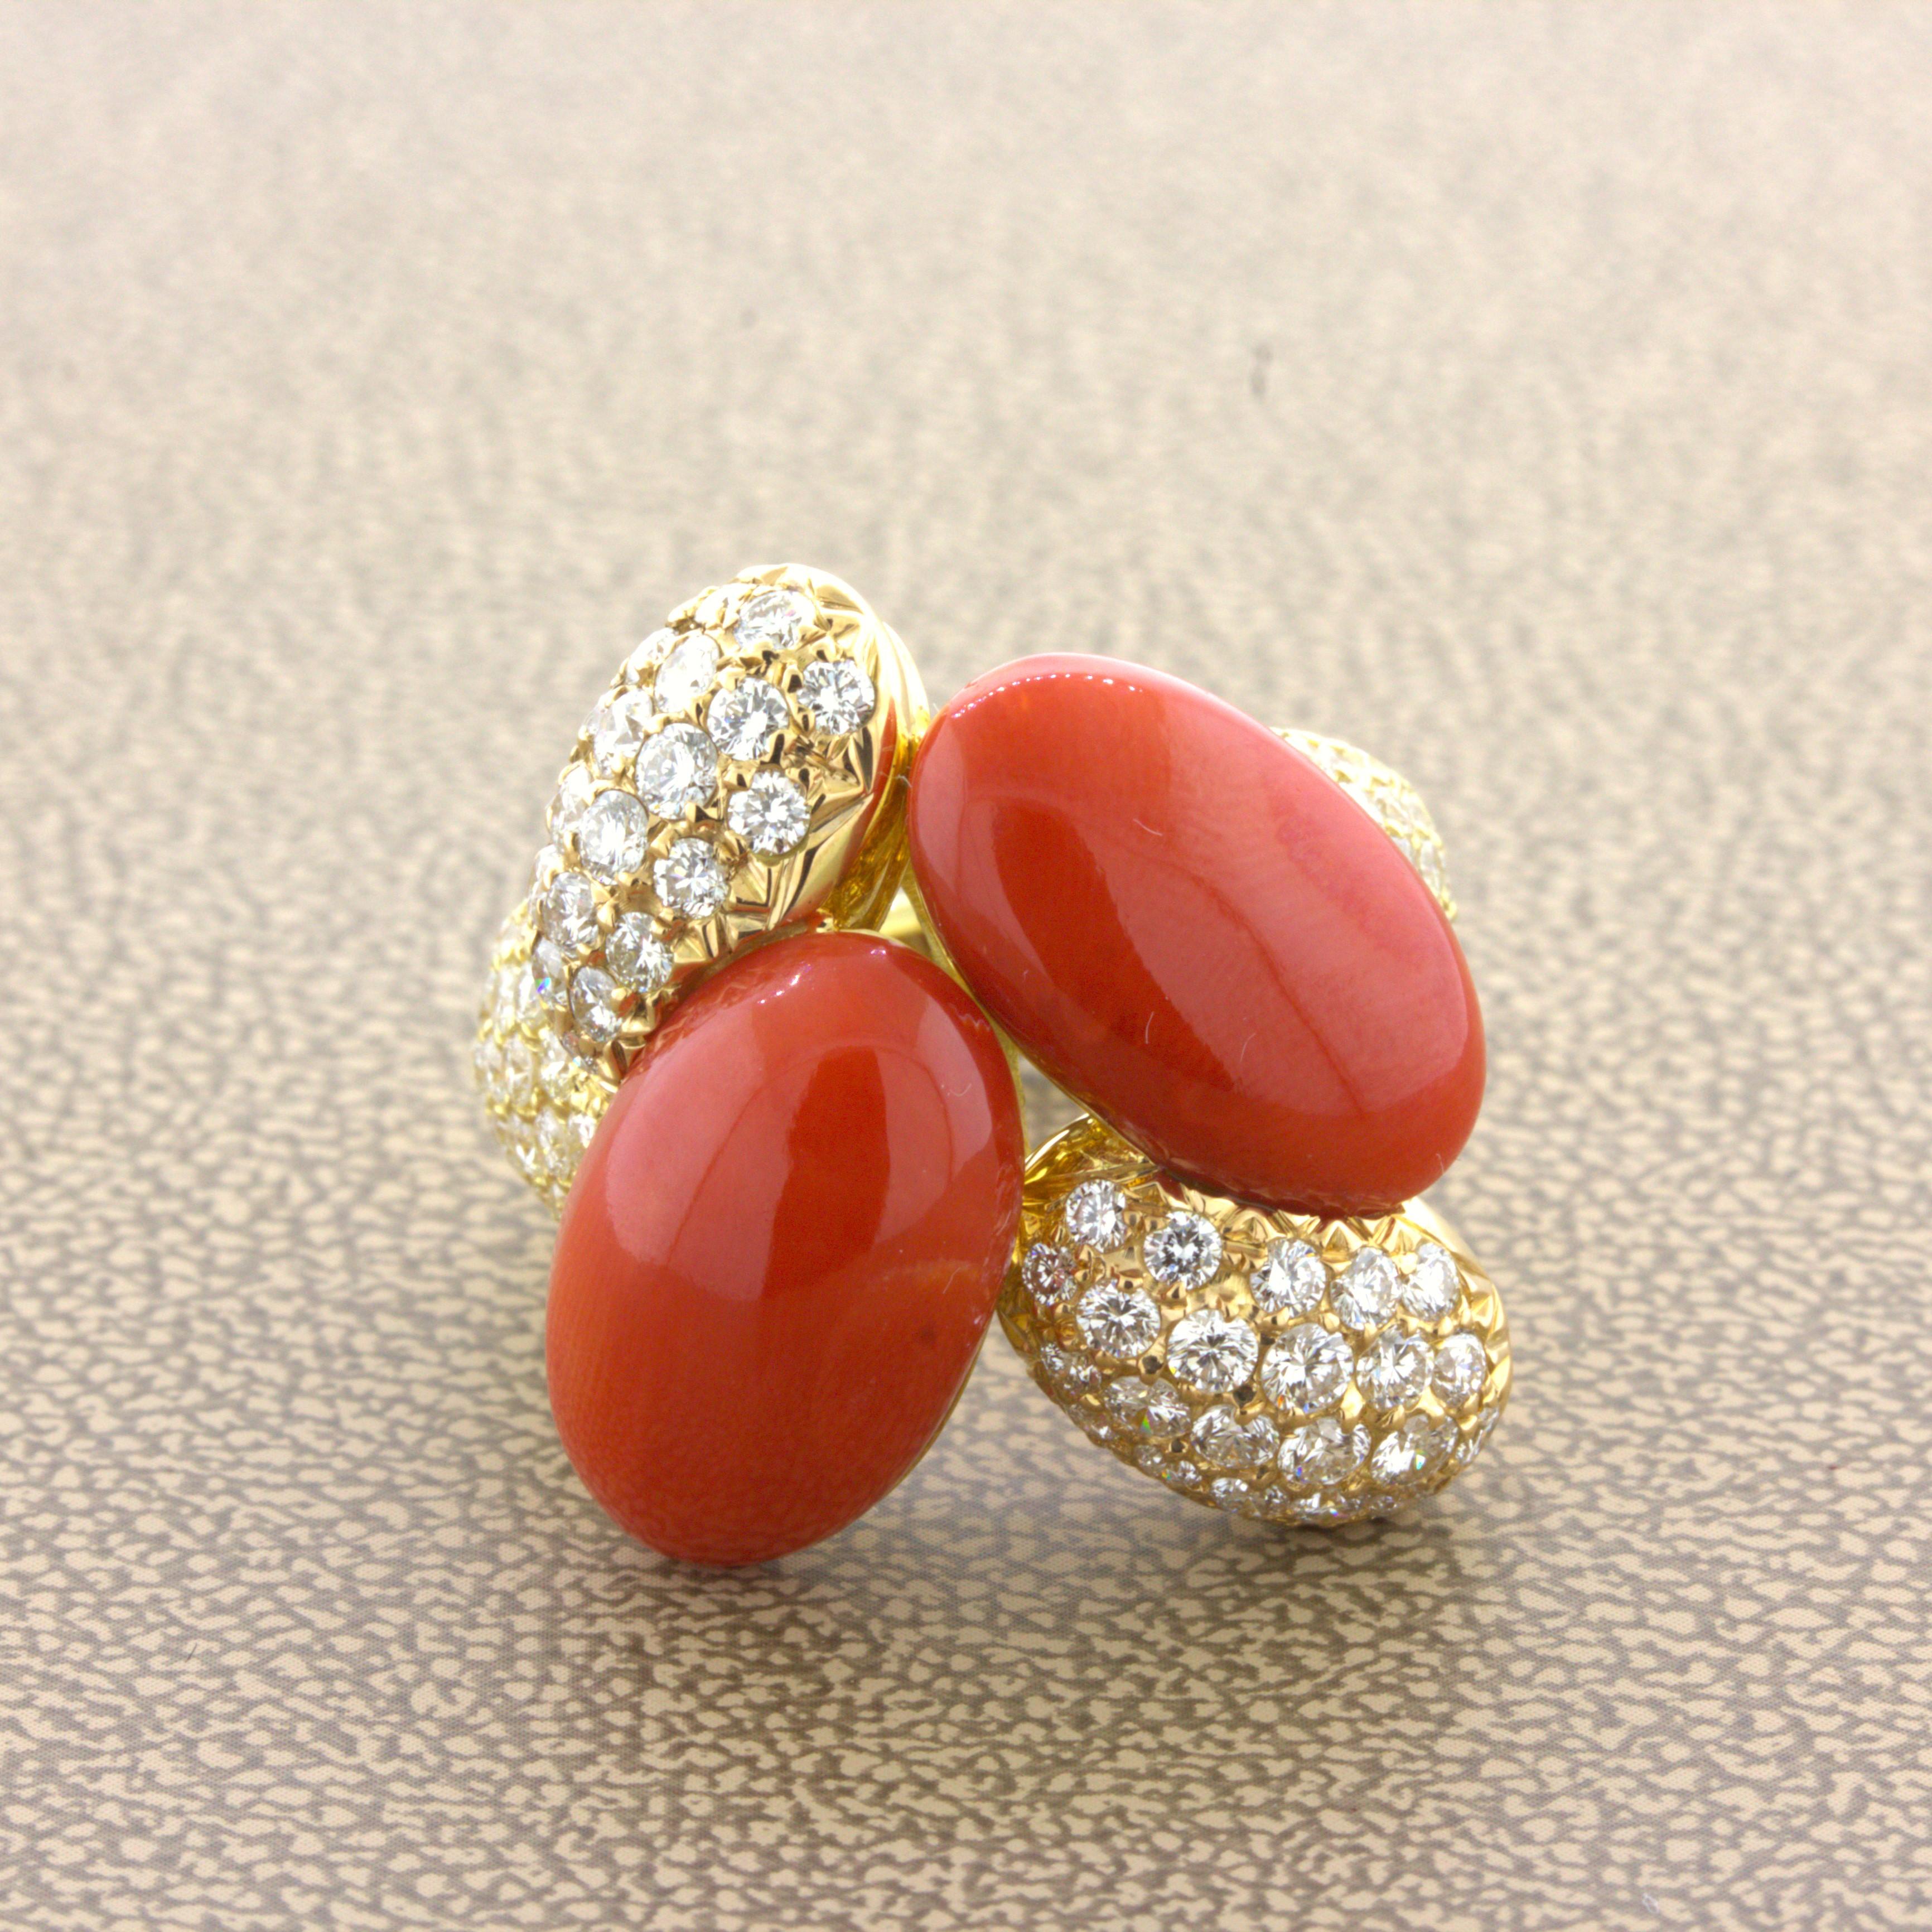 A fun and stylish cocktail ring featuring 2 pieces of fine natural red coral. They are lozenge shaped and have excellent luster and color. They are complemented by 2.47 carats of round brilliant-cut diamonds set around the coral and the ring